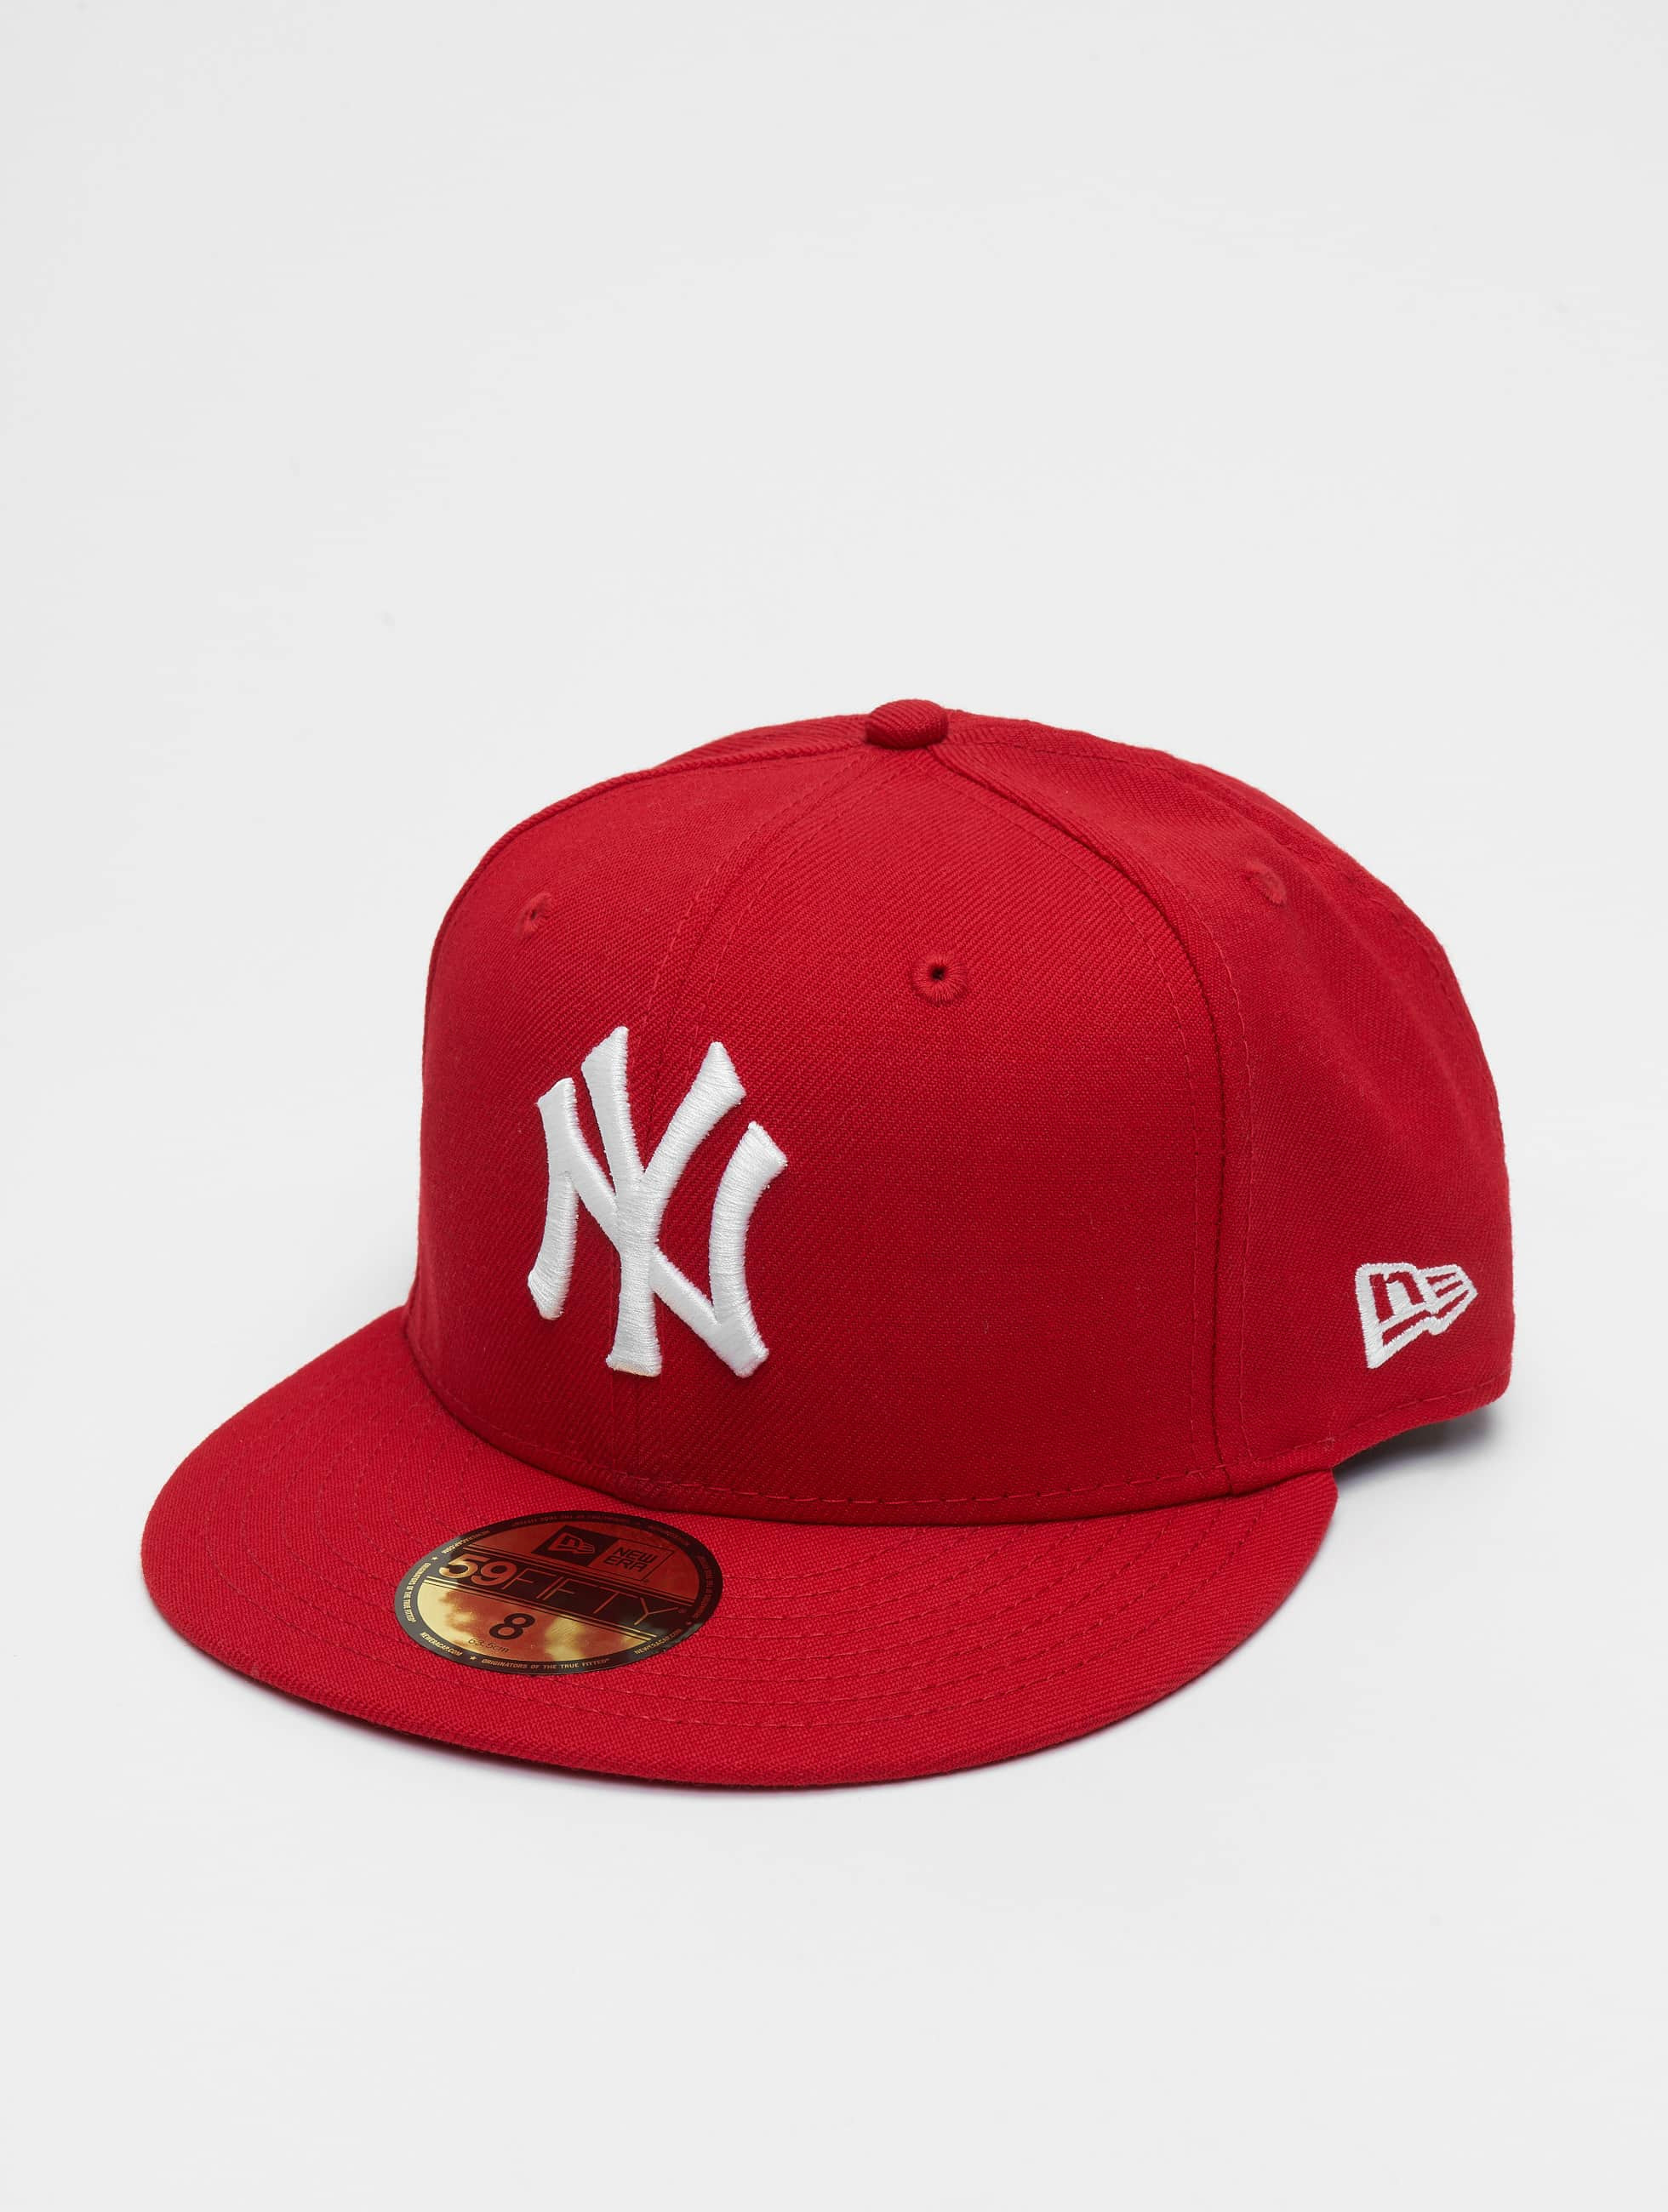 New Era Casquette / Fitted MLB Basic NY Yankees 59Fifty en rouge